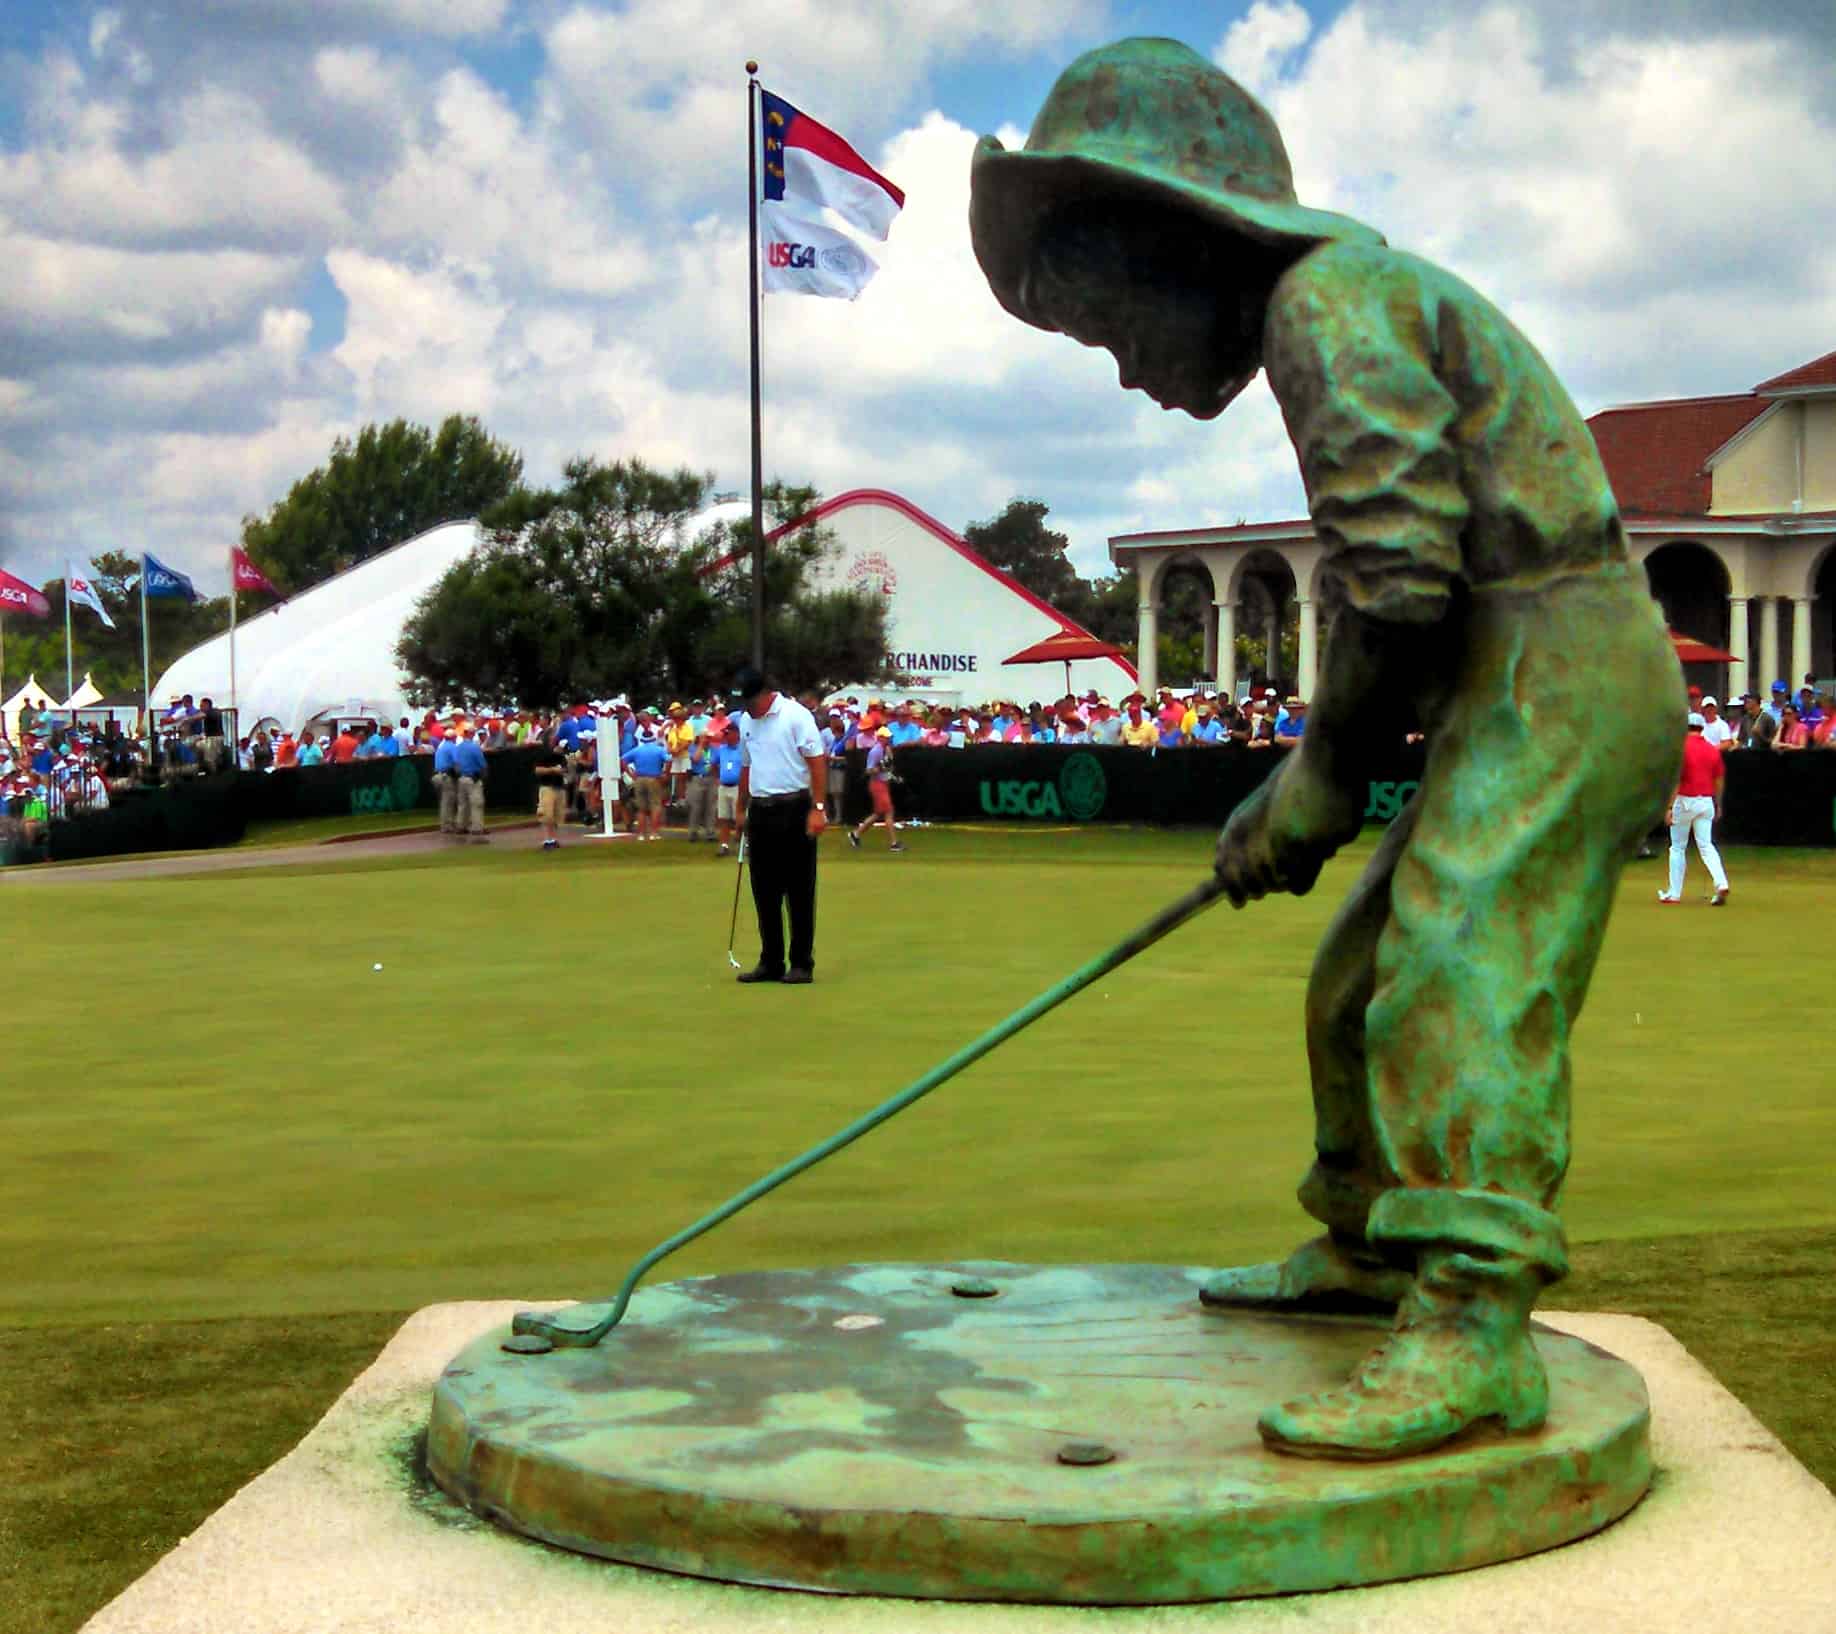 Phil Mickelson putts near Pinehurst’s iconic Putter Boy statue on Friday of the 2014 U.S. Open.